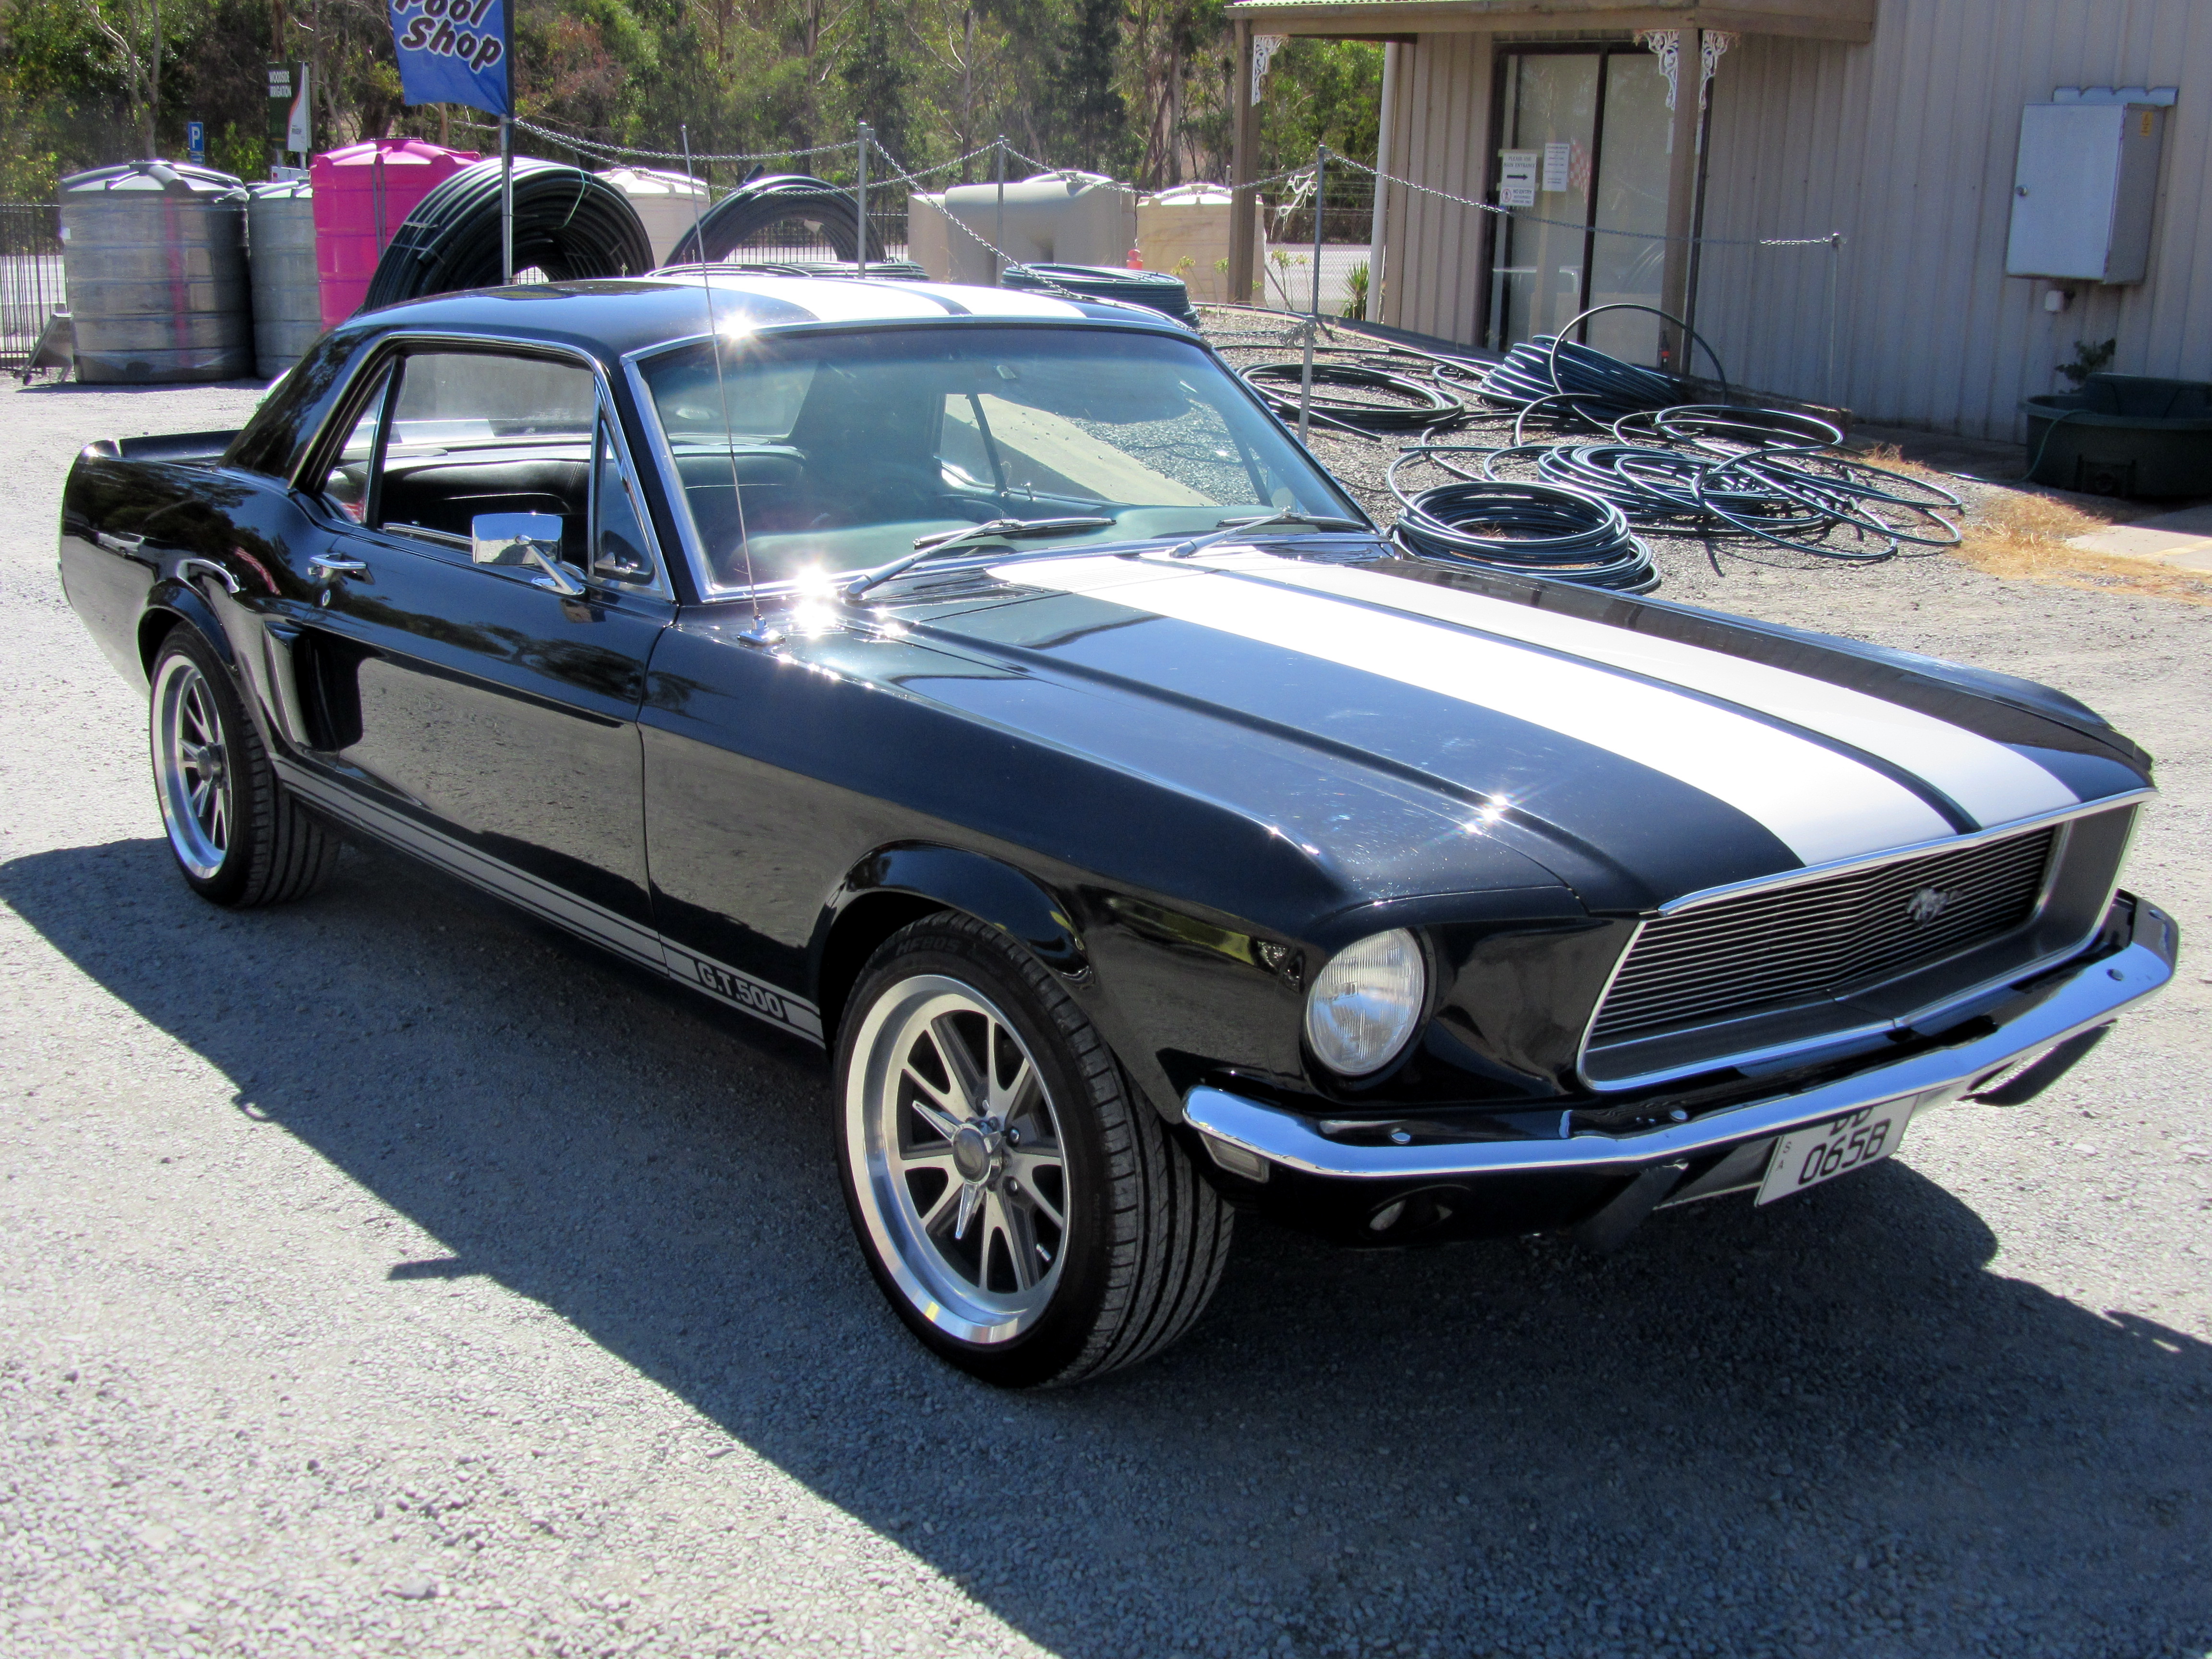 1968 Ford Mustang (Shelby) Tribute Car – Collectable Classic Cars